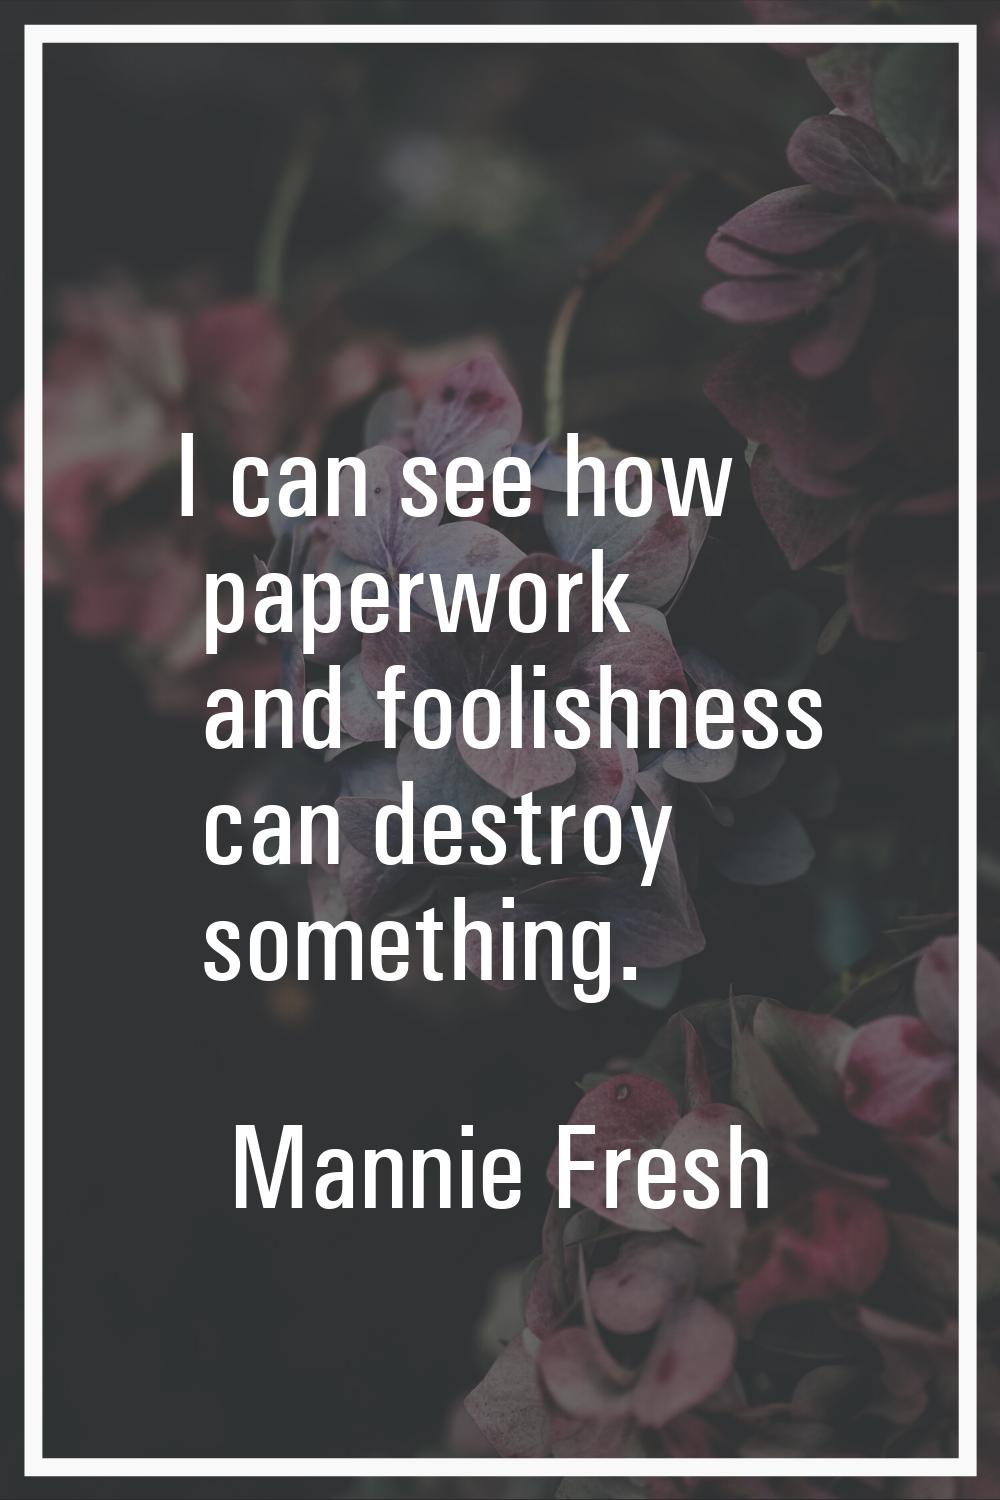 I can see how paperwork and foolishness can destroy something.